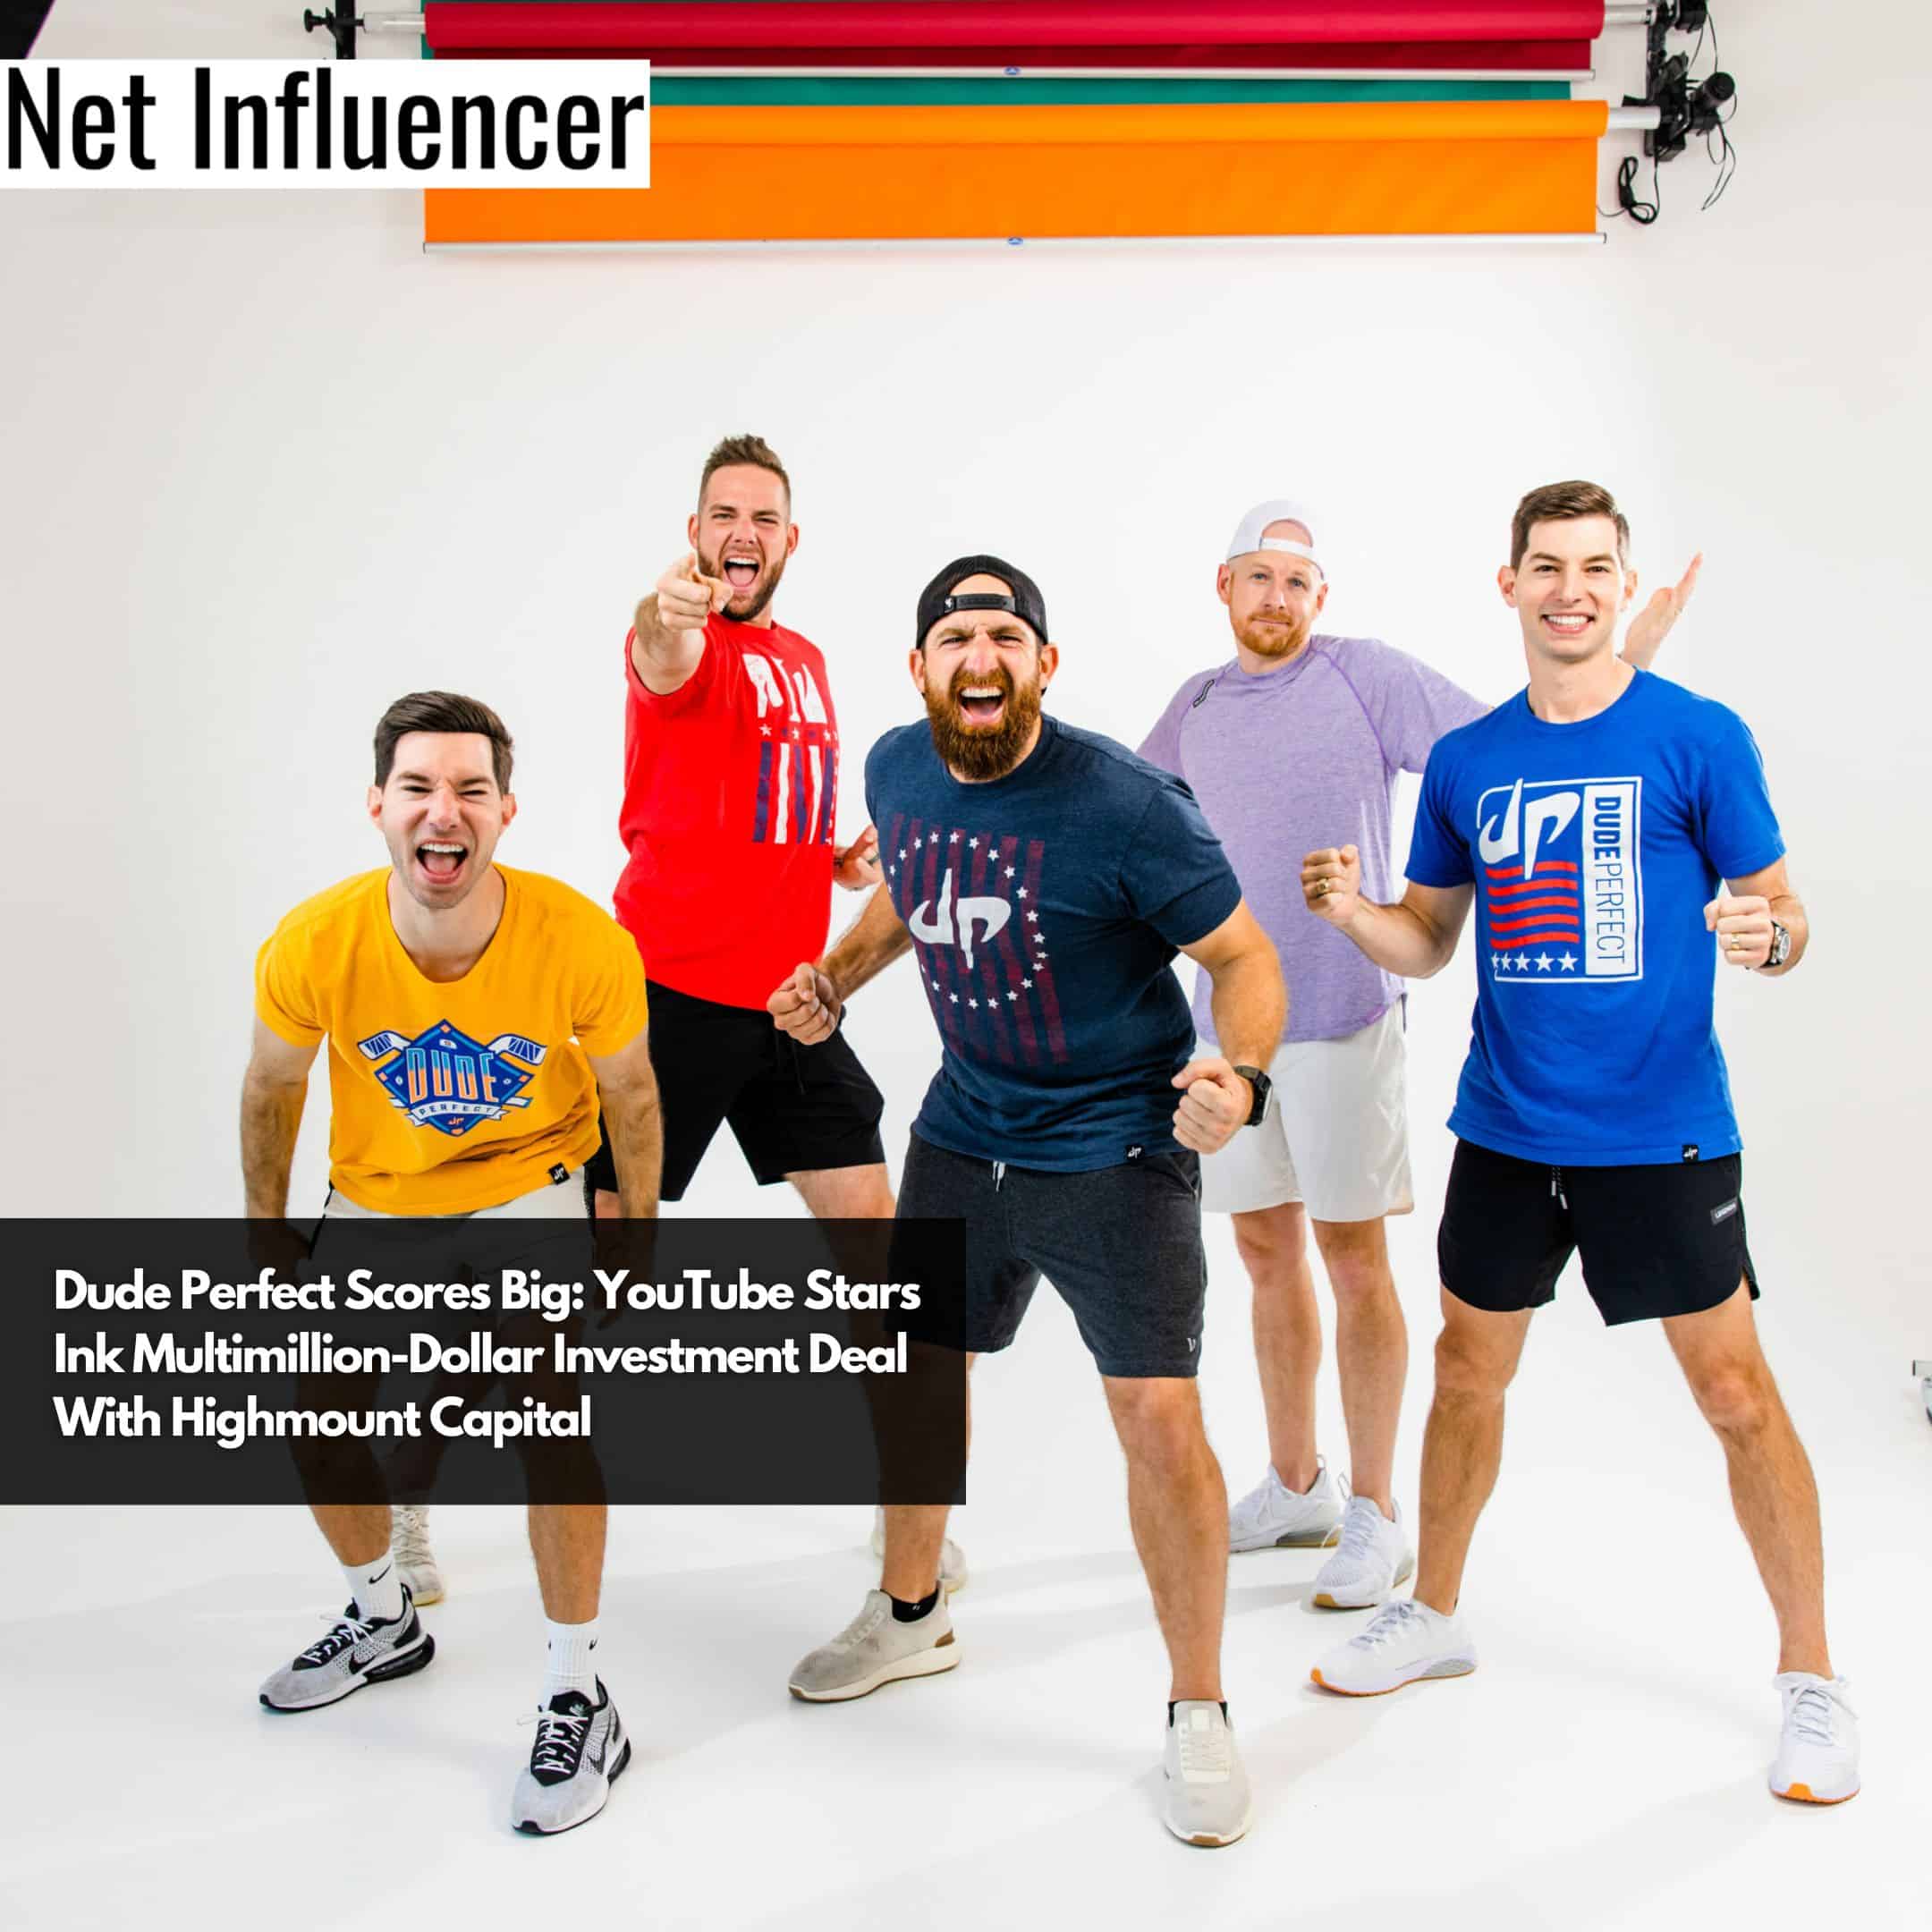 Dude Perfect Scores Big YouTube Stars Ink Multimillion-Dollar Investment Deal With Highmount Capital